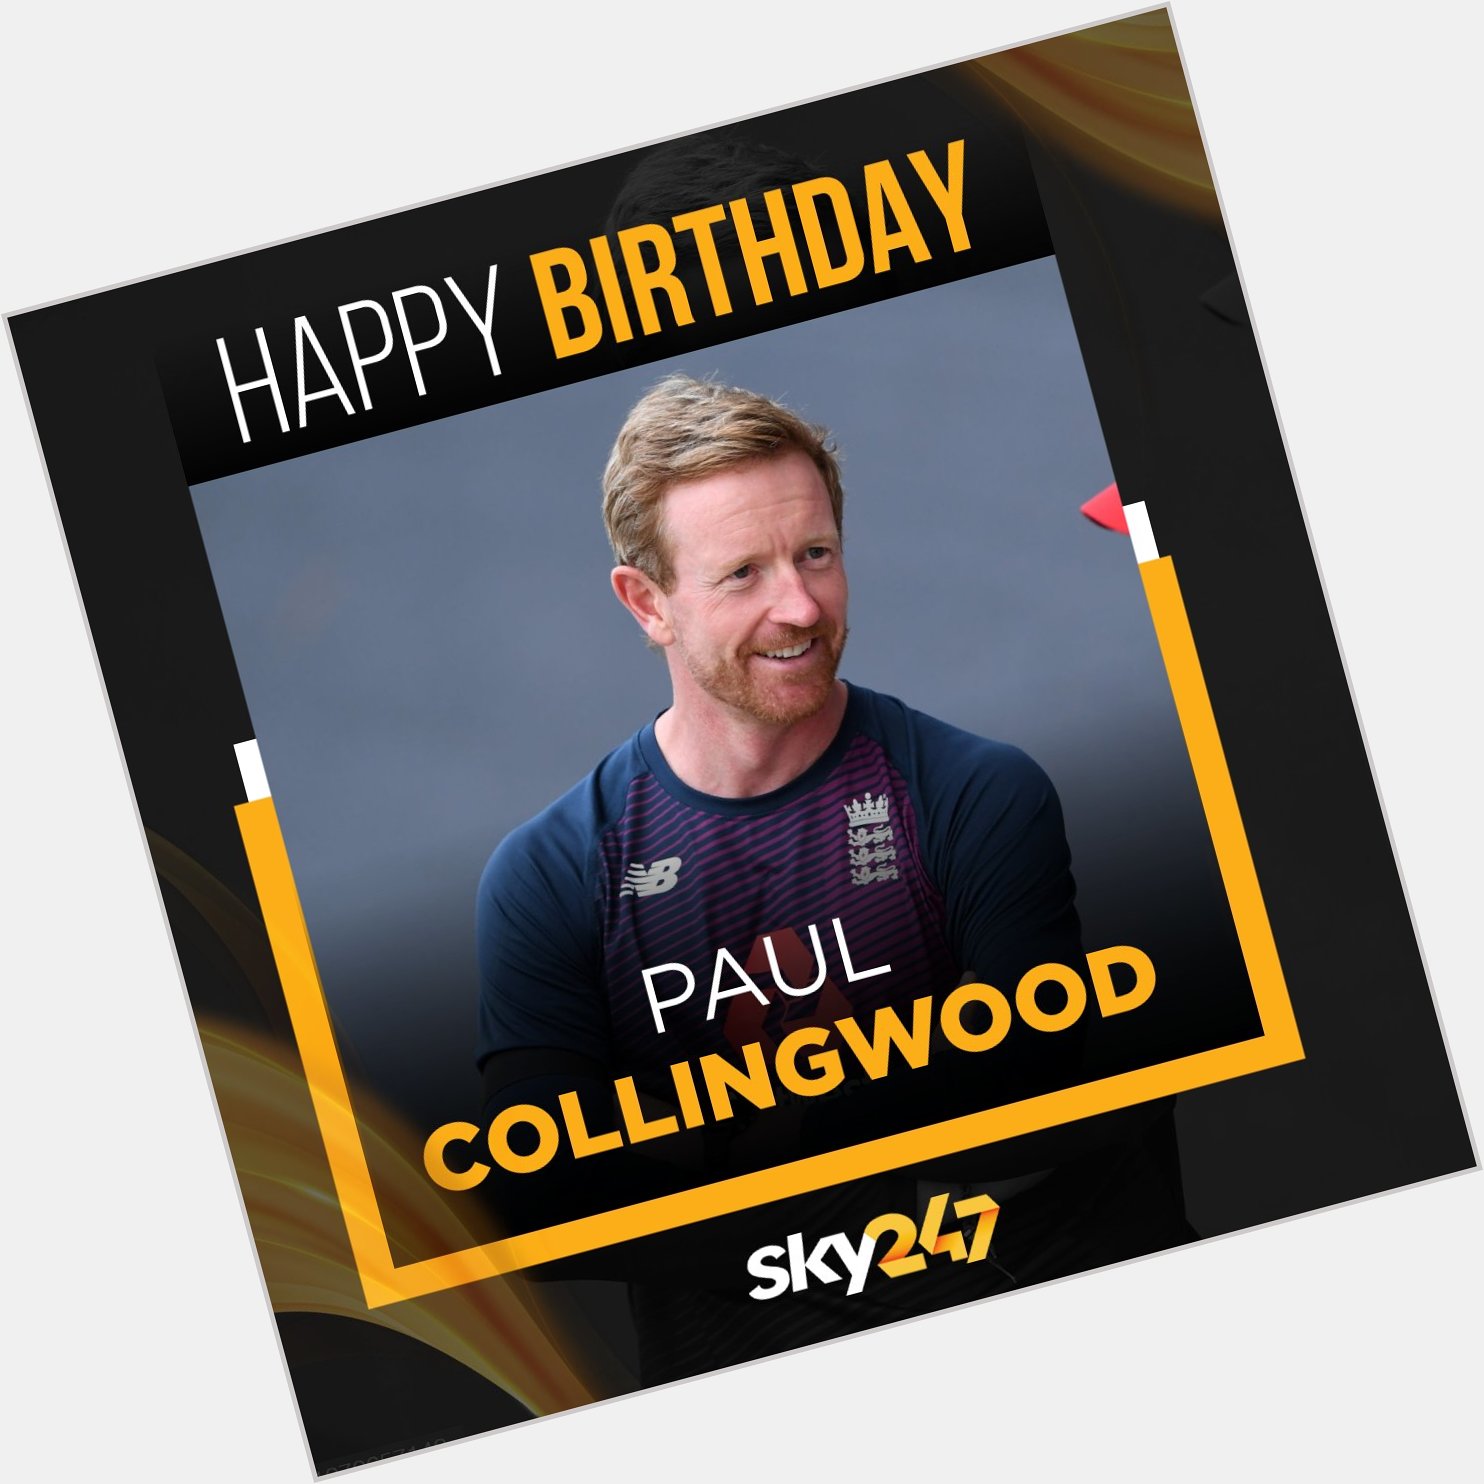 Wishing former England captain Paul Collingwood a very happy birthday.    